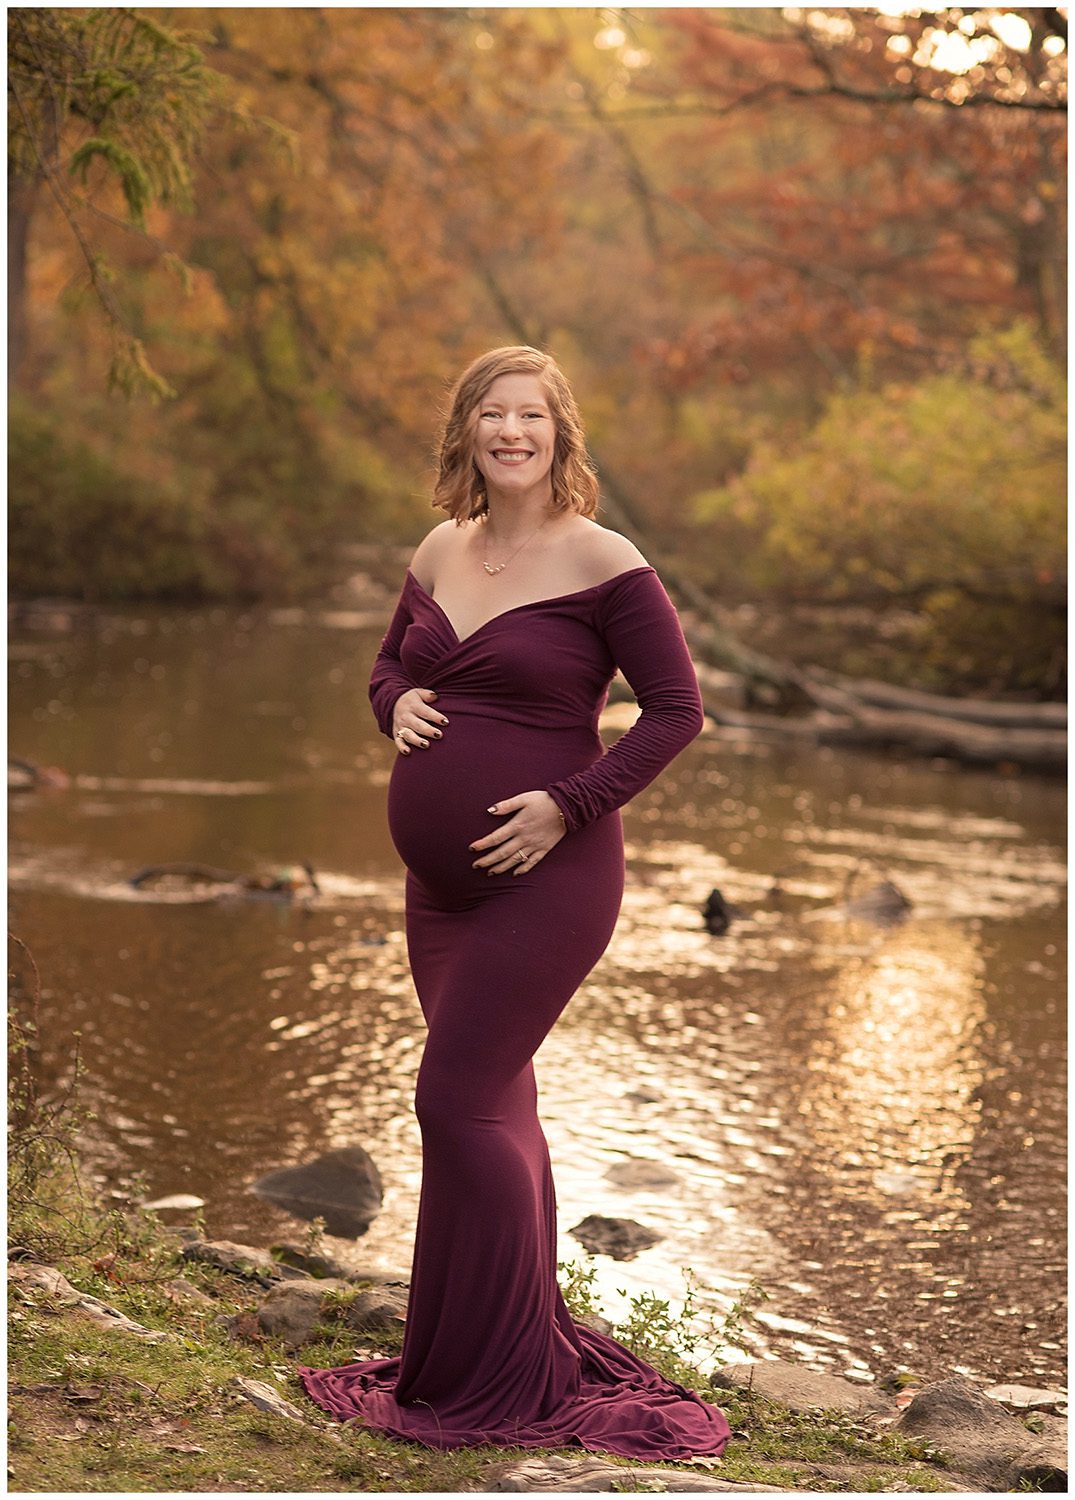 Milham Park location for maternity pictures